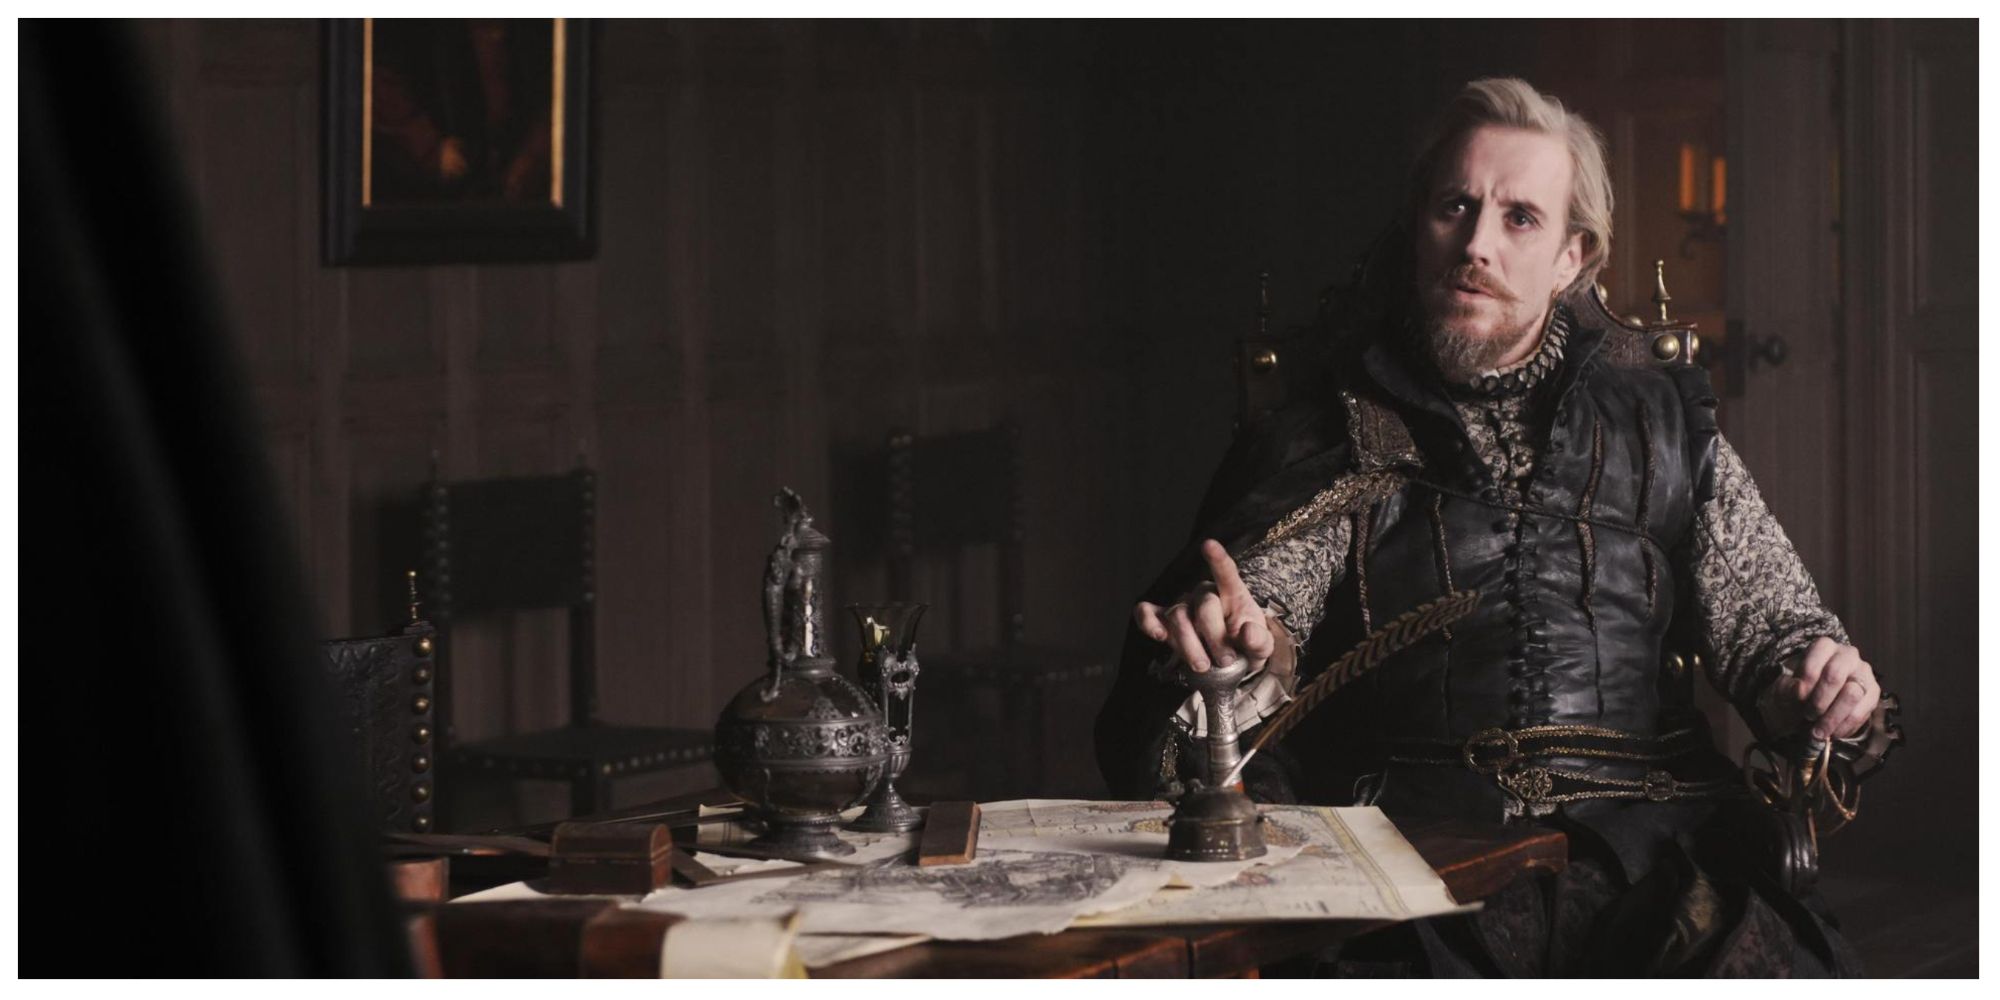  Rhys Ifans as Edward de Vere, the Earl of Oxford in Anonymous